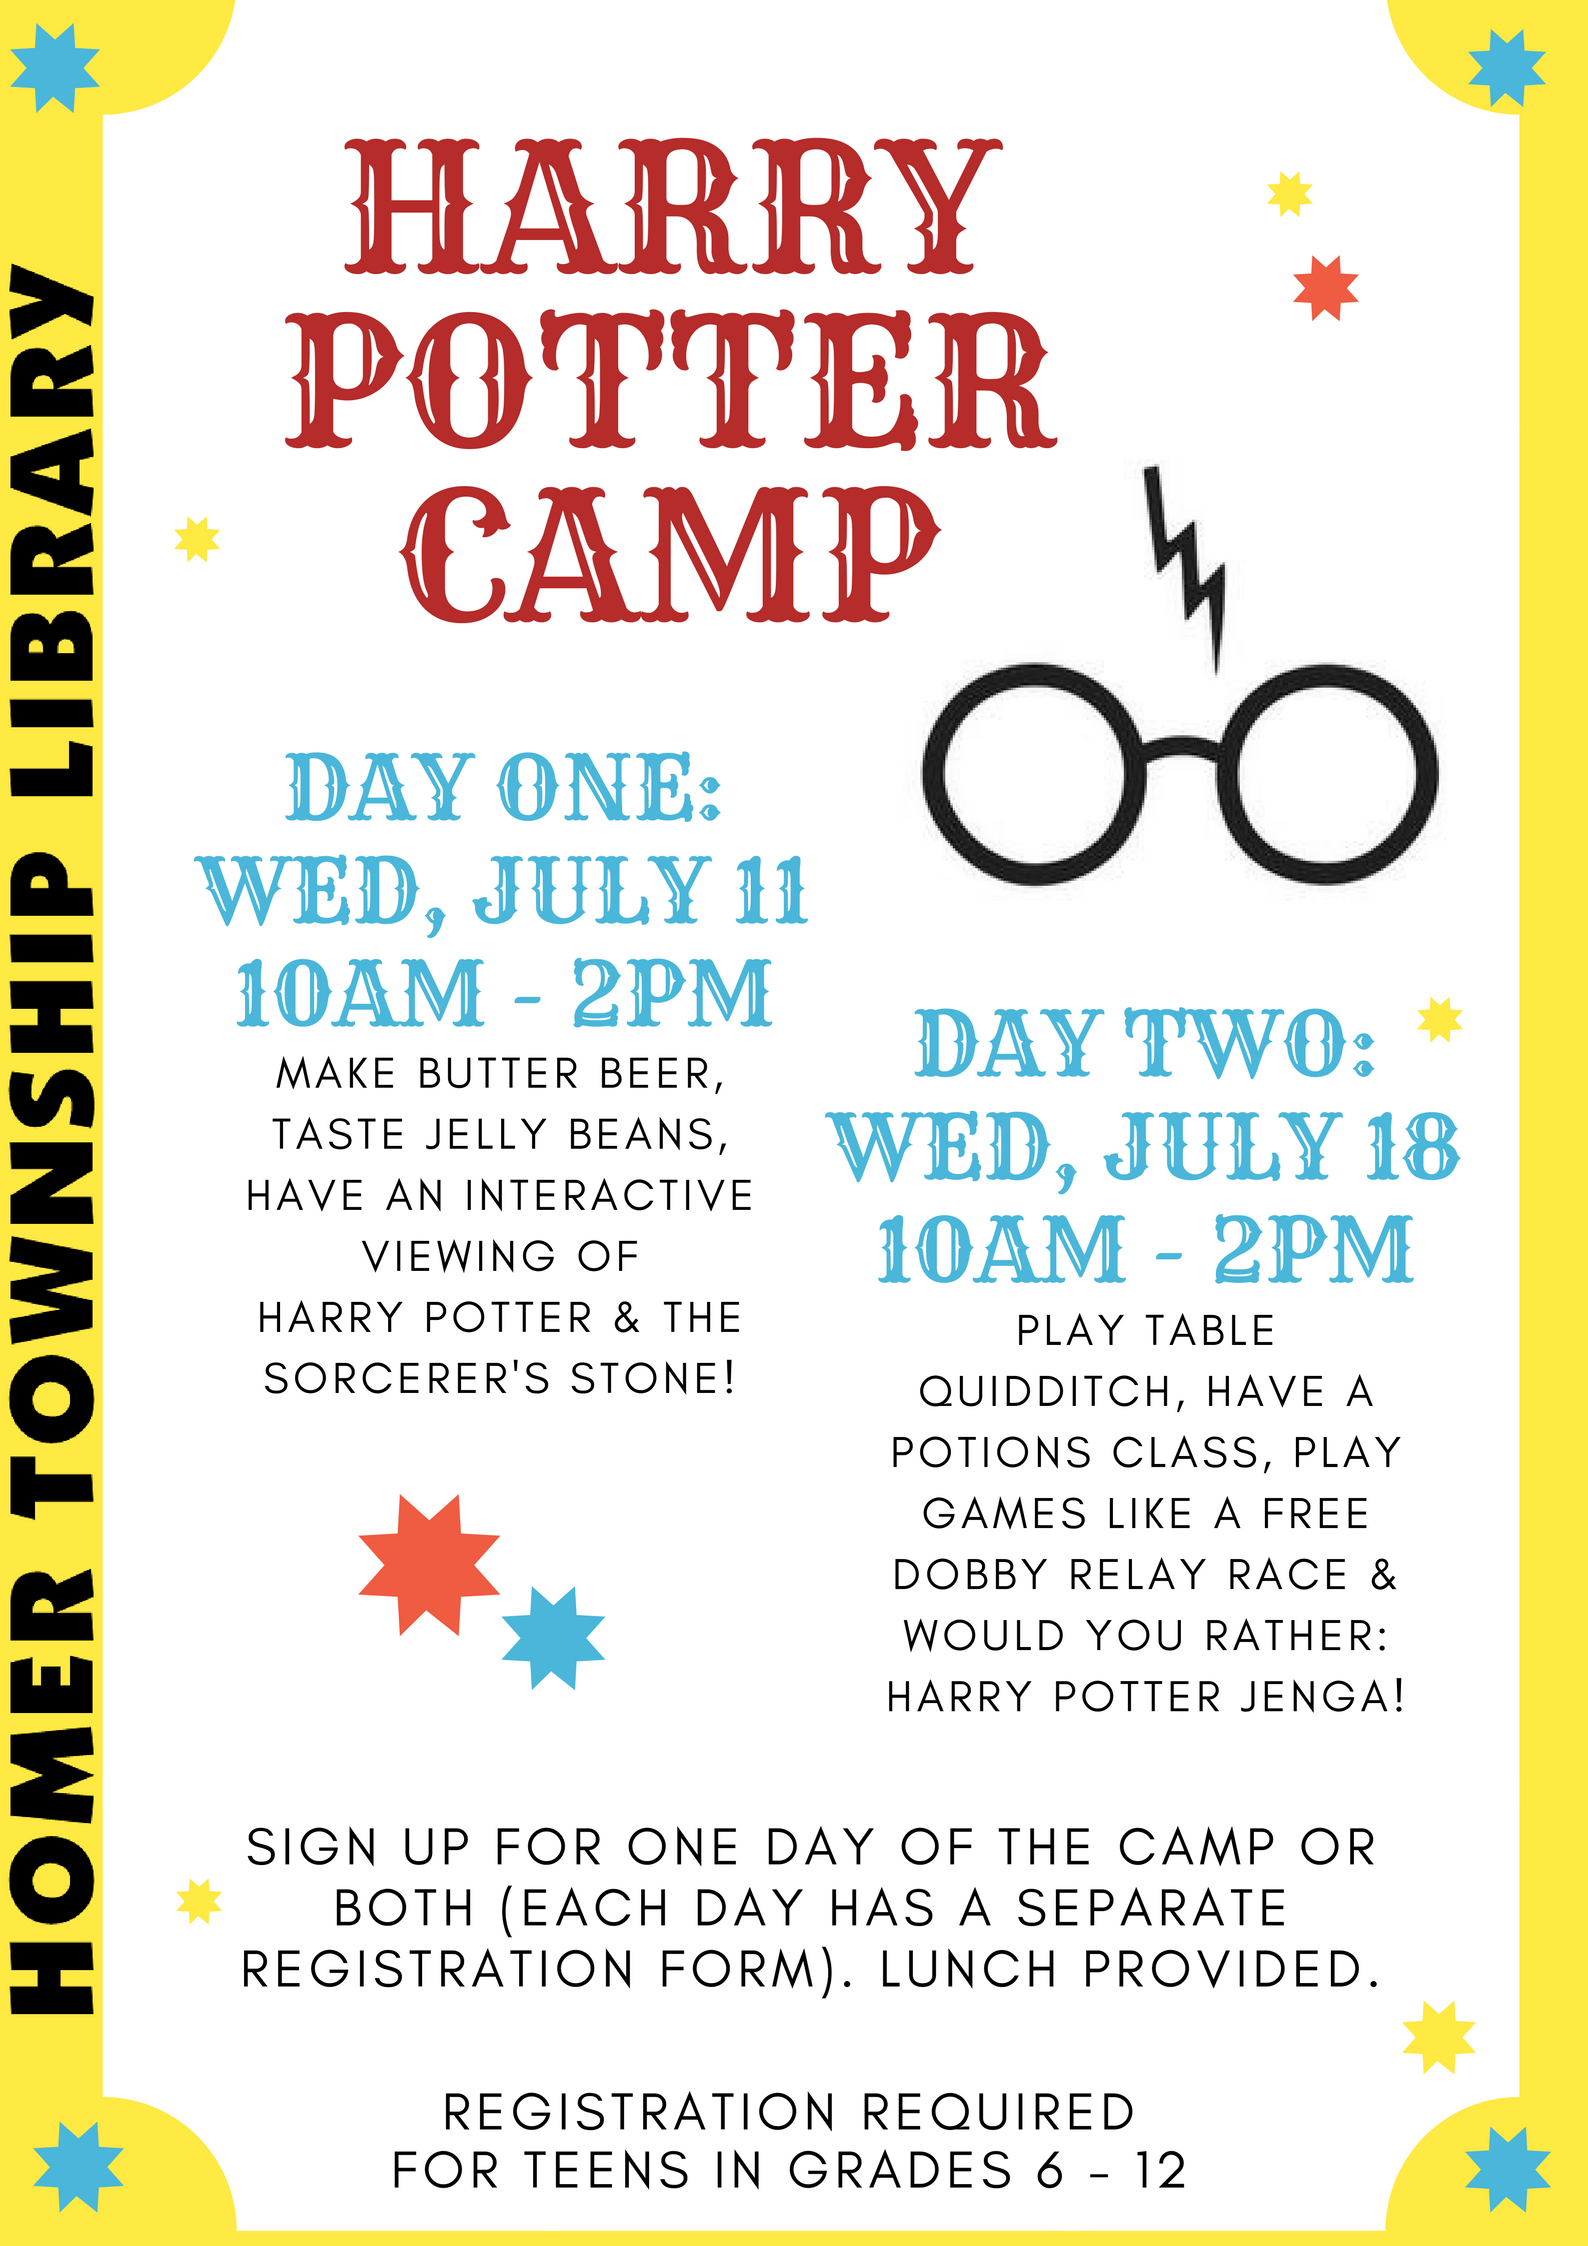 HARRY POTTER CAMP DAY ONE Homer Township Public Library District